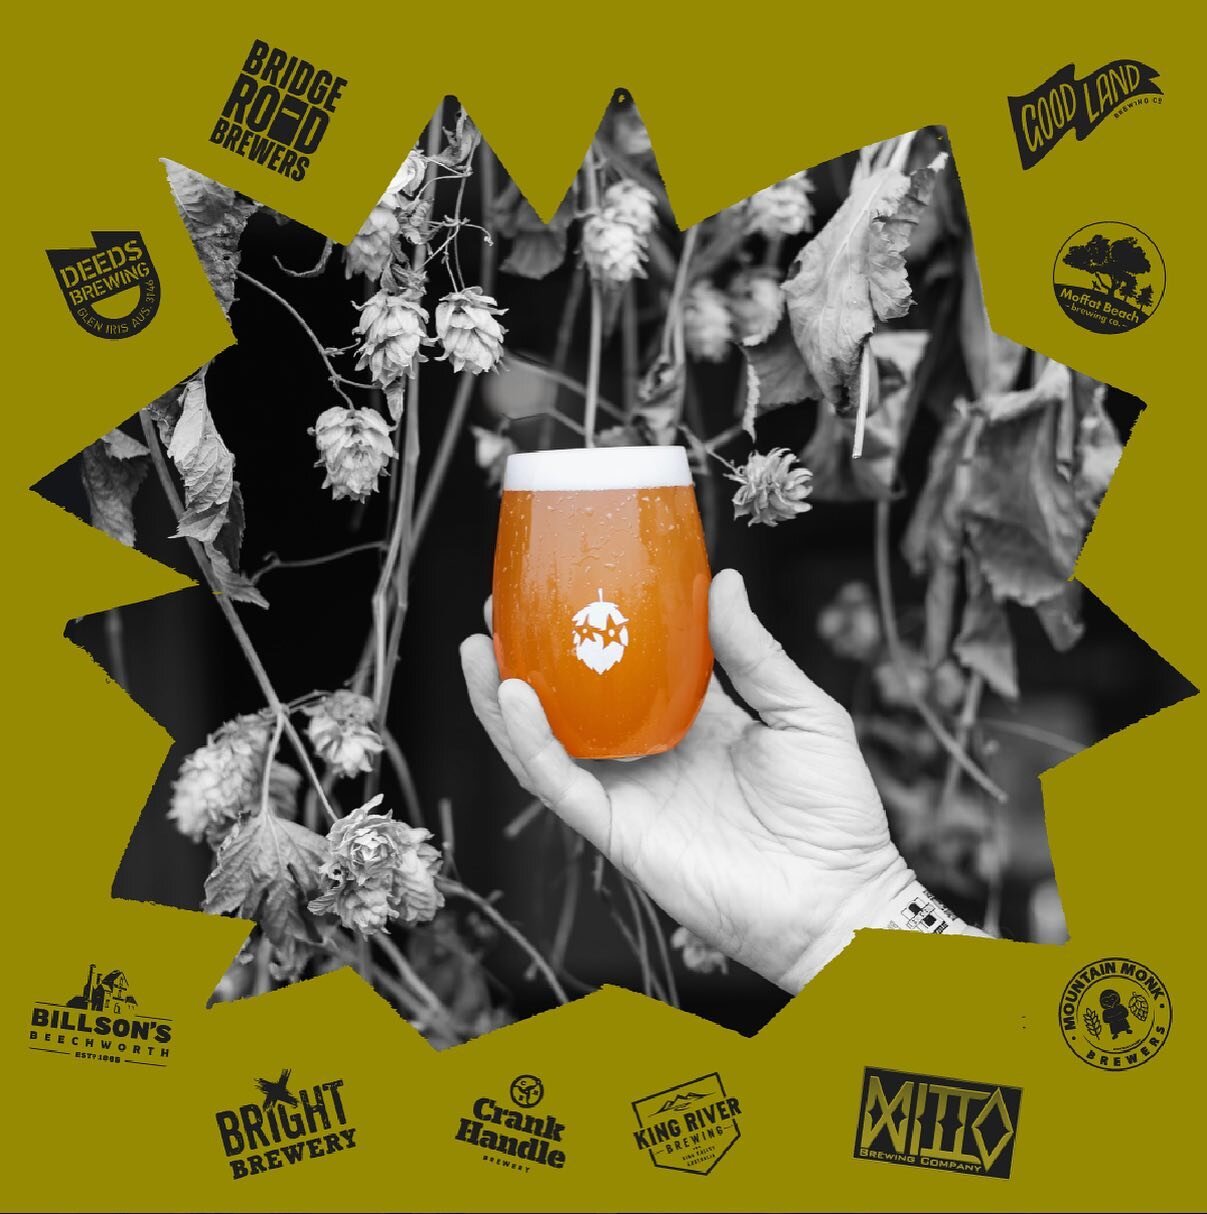 Catch us at @thehighcountryhop presented by @hopproductsaustralia on Saturday 23 March at the beautiful Beechworth Historical Village for an epic day and night as we celebrate the first hop harvest of the season. ☀️

How? With an incredible music lin